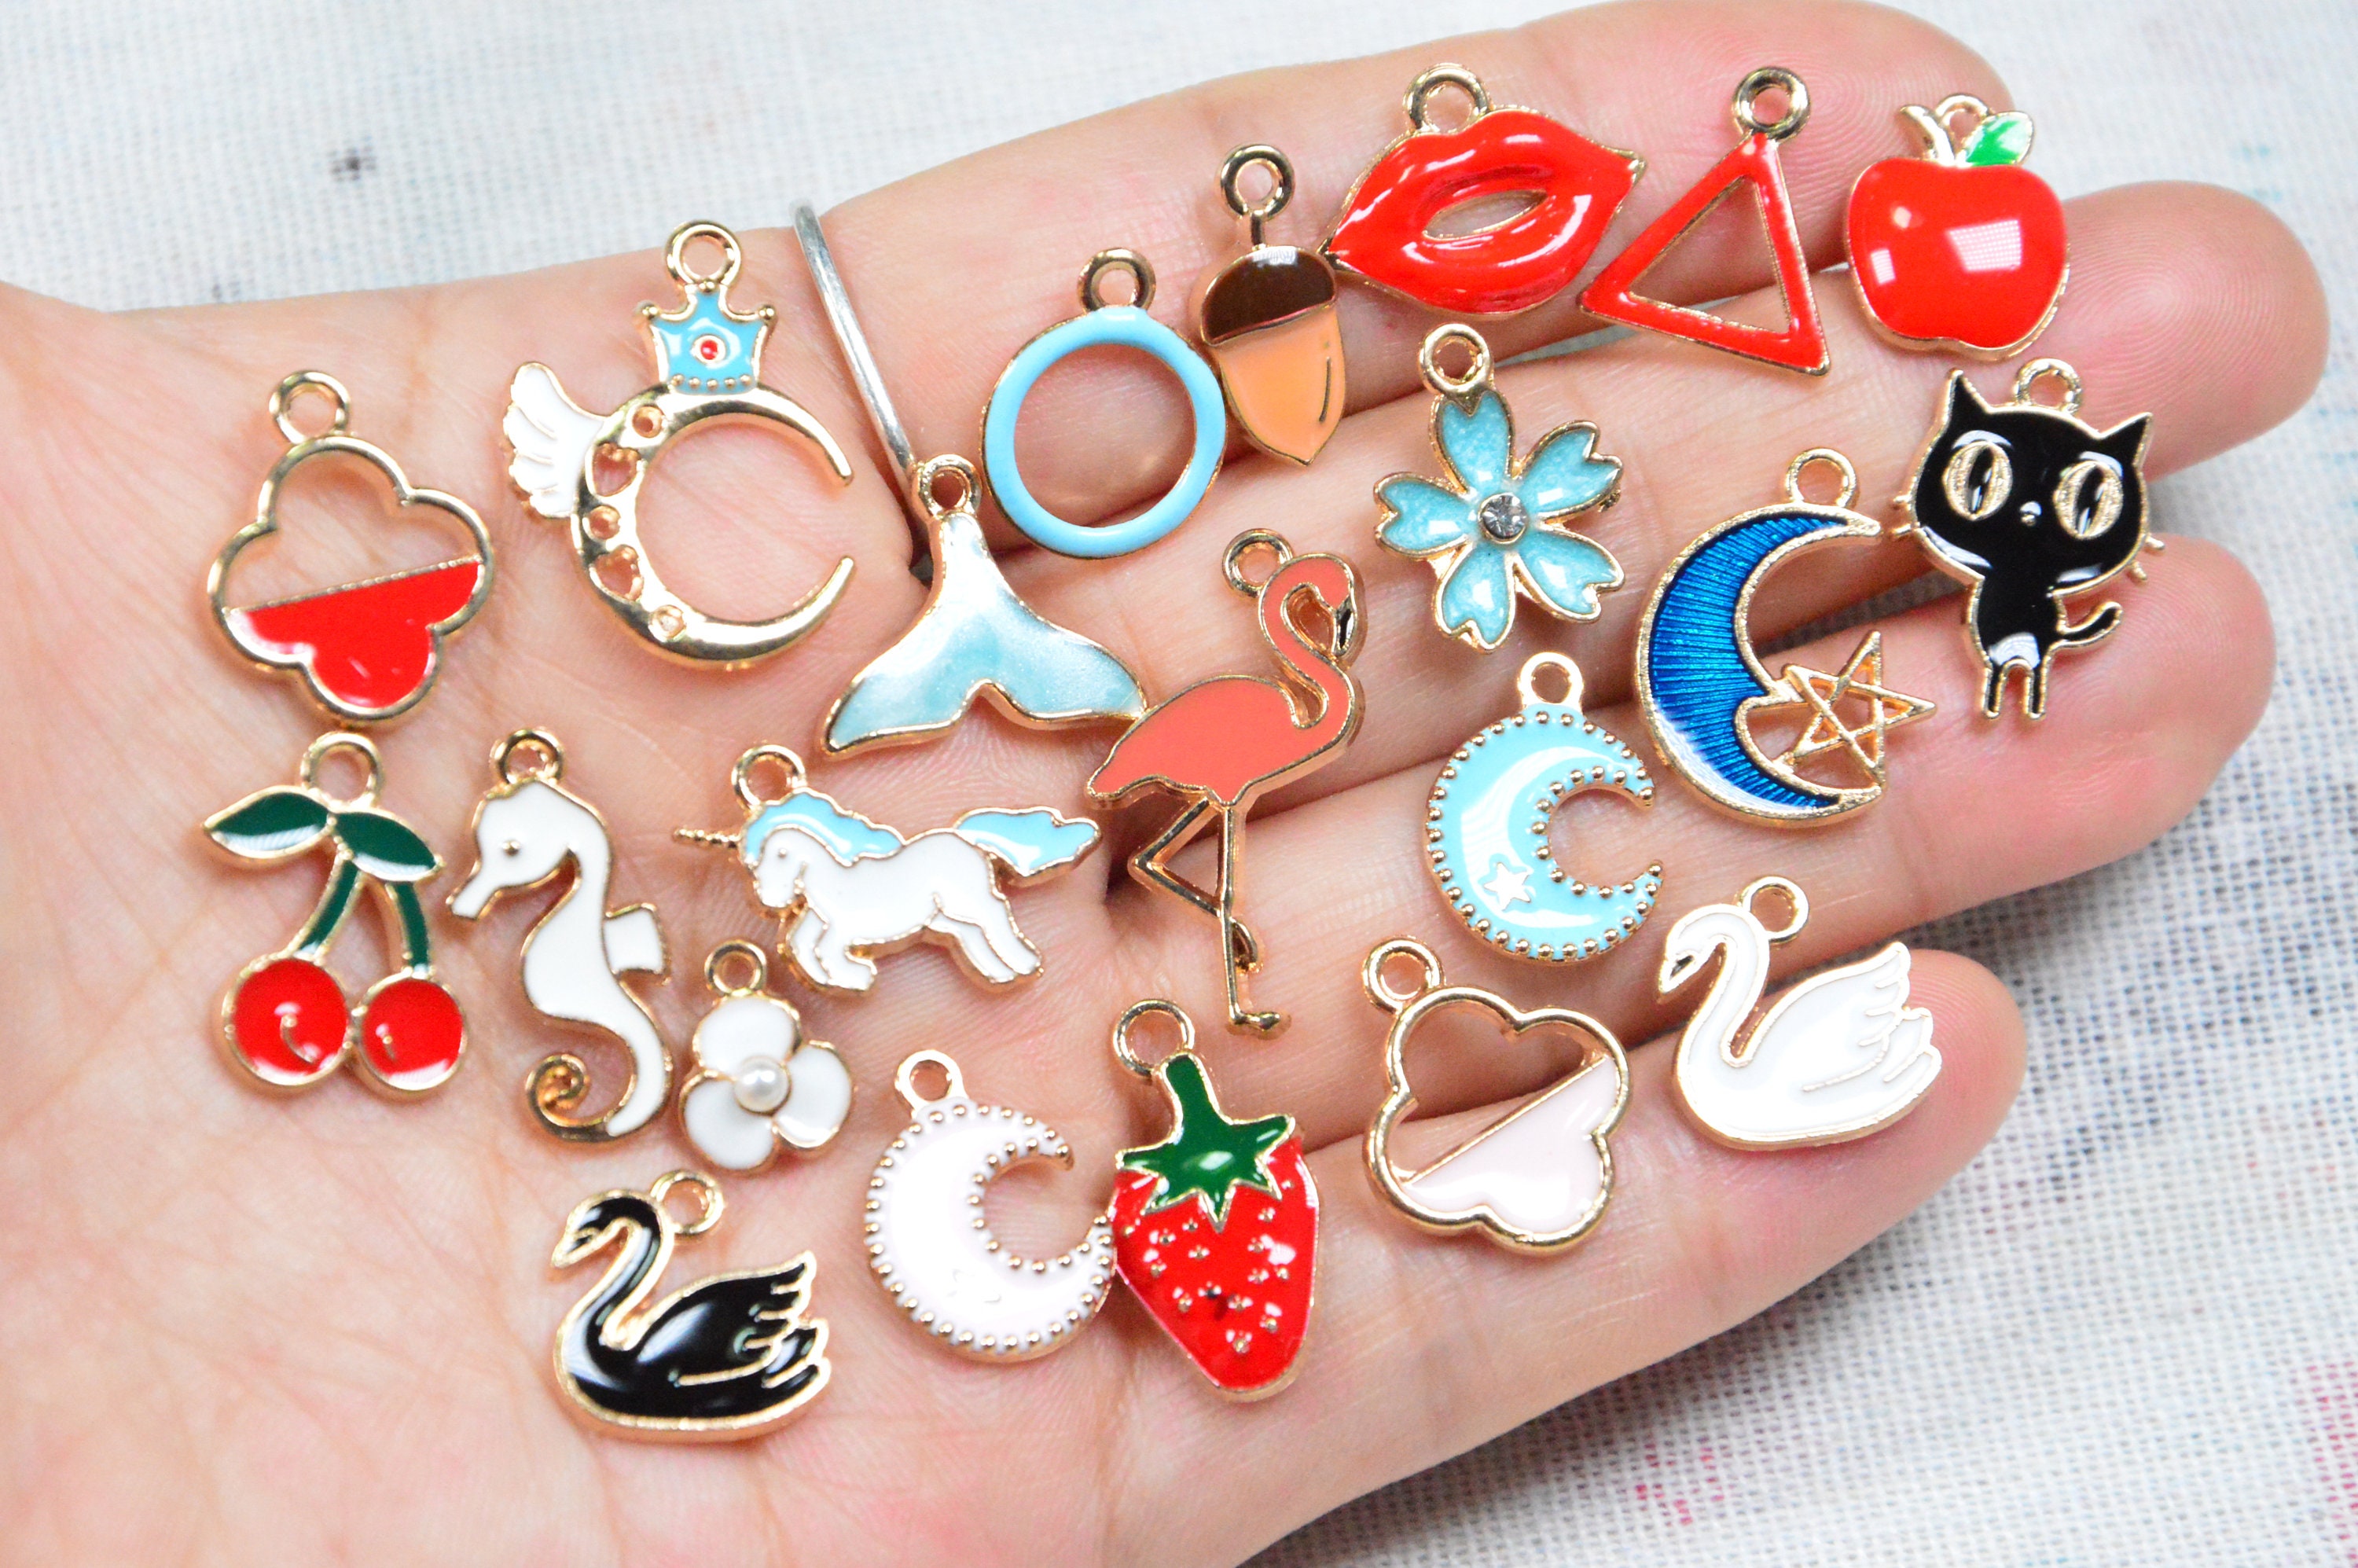 Bulk Enamel Charms, Multicolor Charms , Assortment of Gold Enamel Charms  for Jewelry Making pick the Charms You Wantcheck DESCRIPTION 